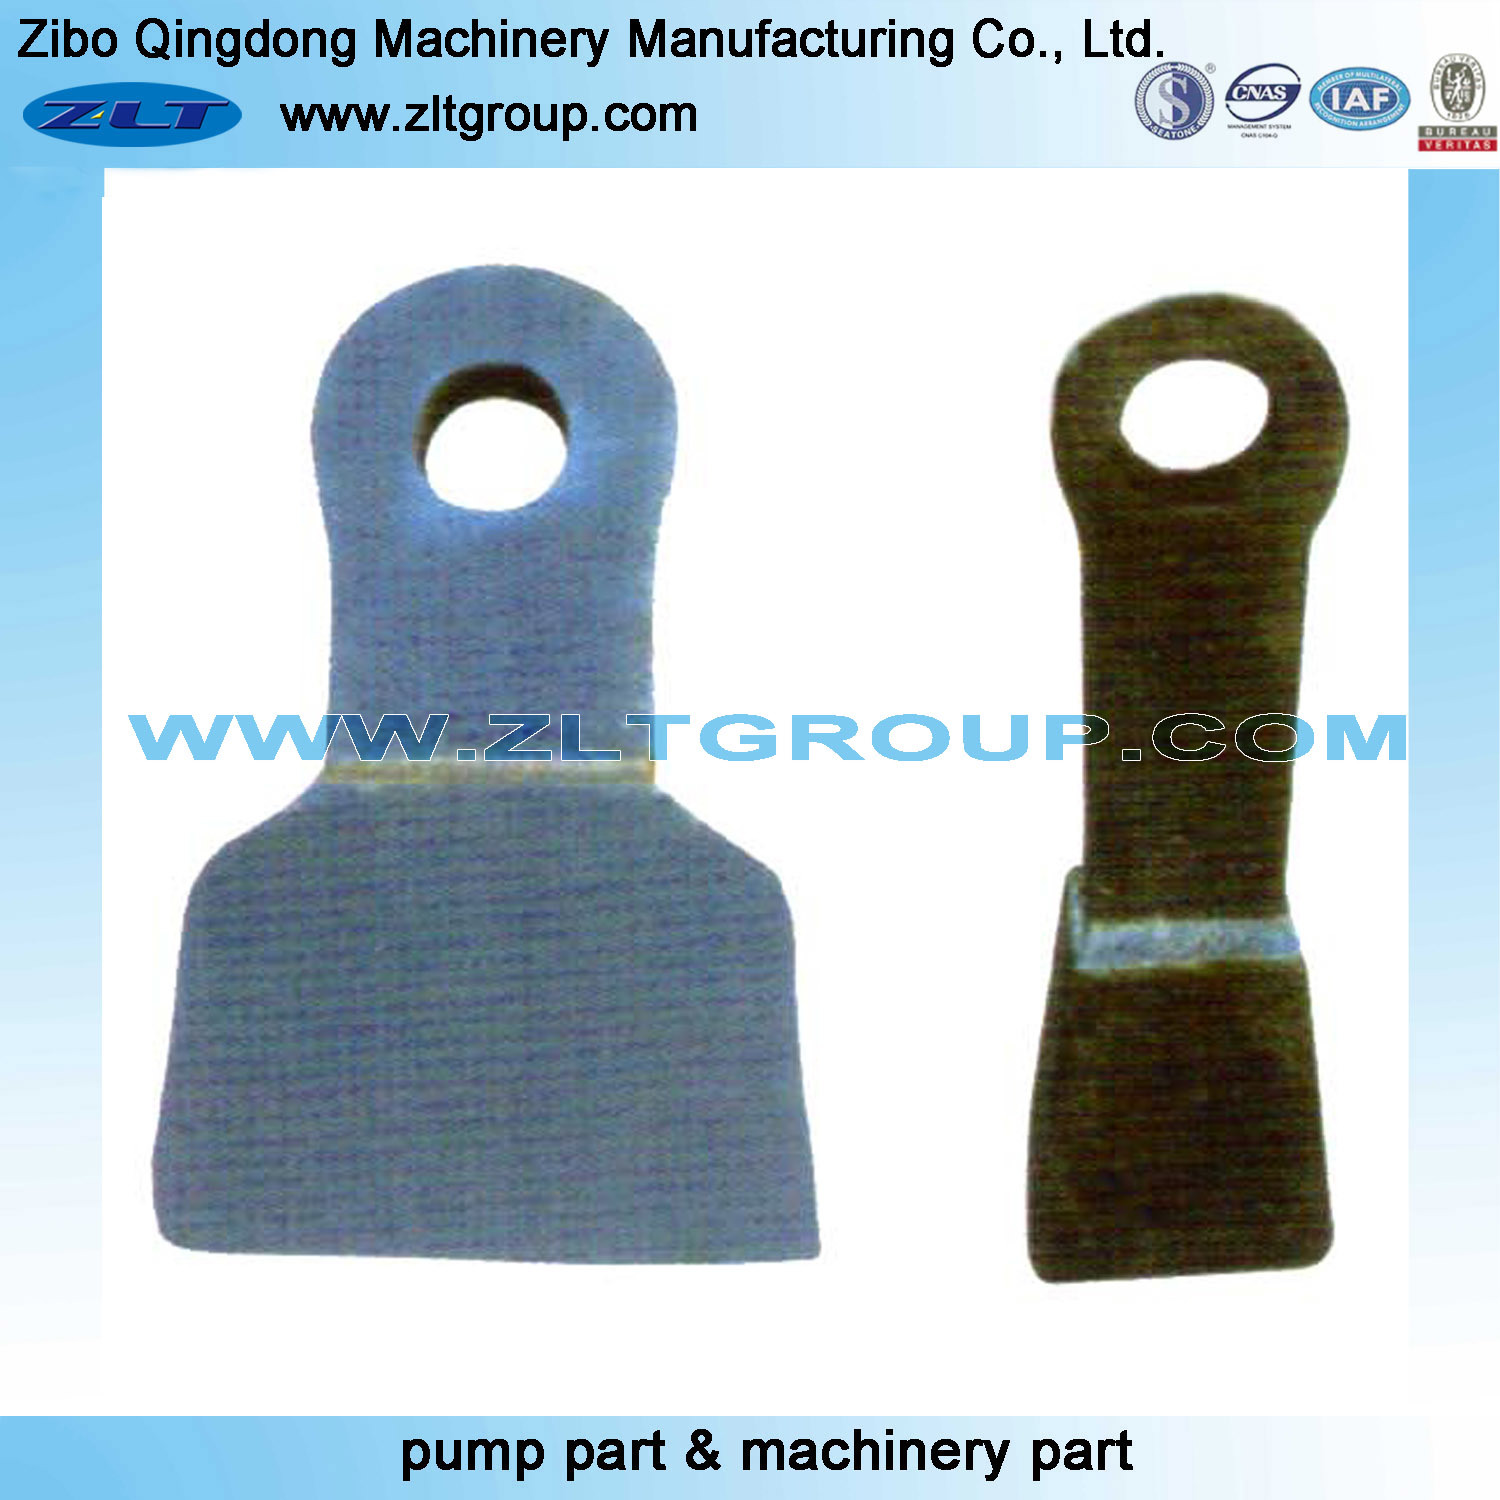 Alloy Hammers for Mining Industry